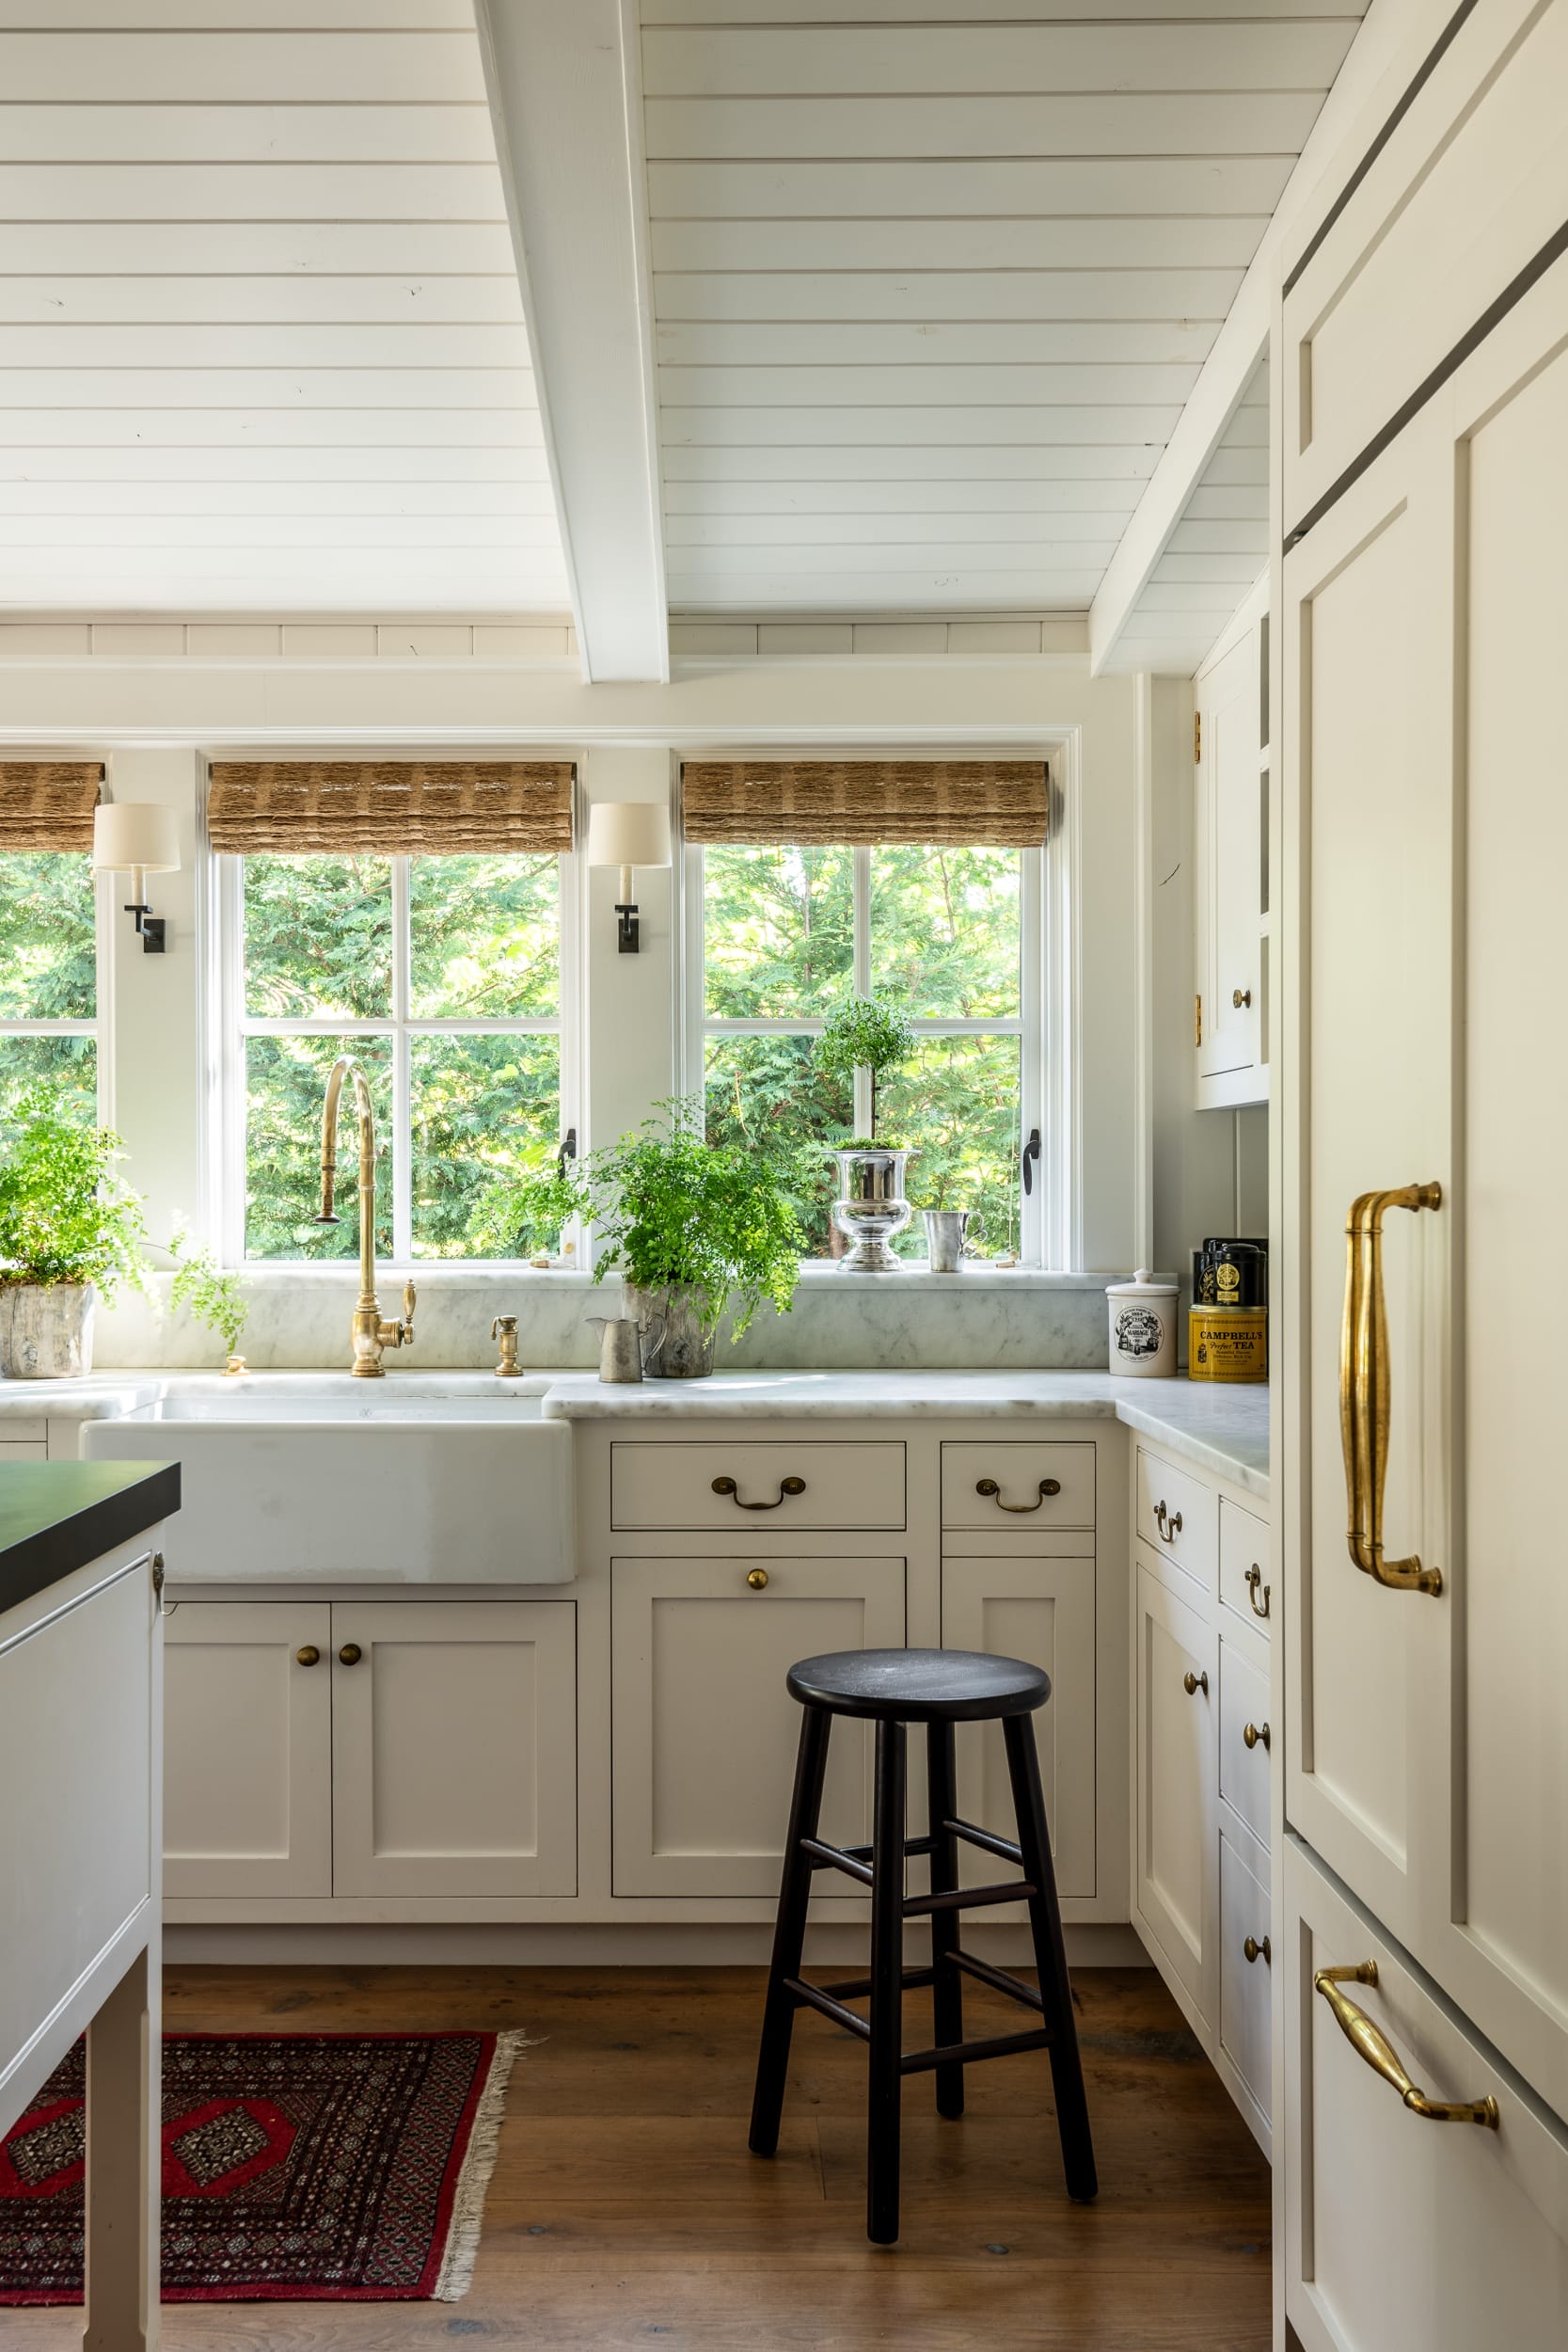 A white kitchen with a window and a stool.